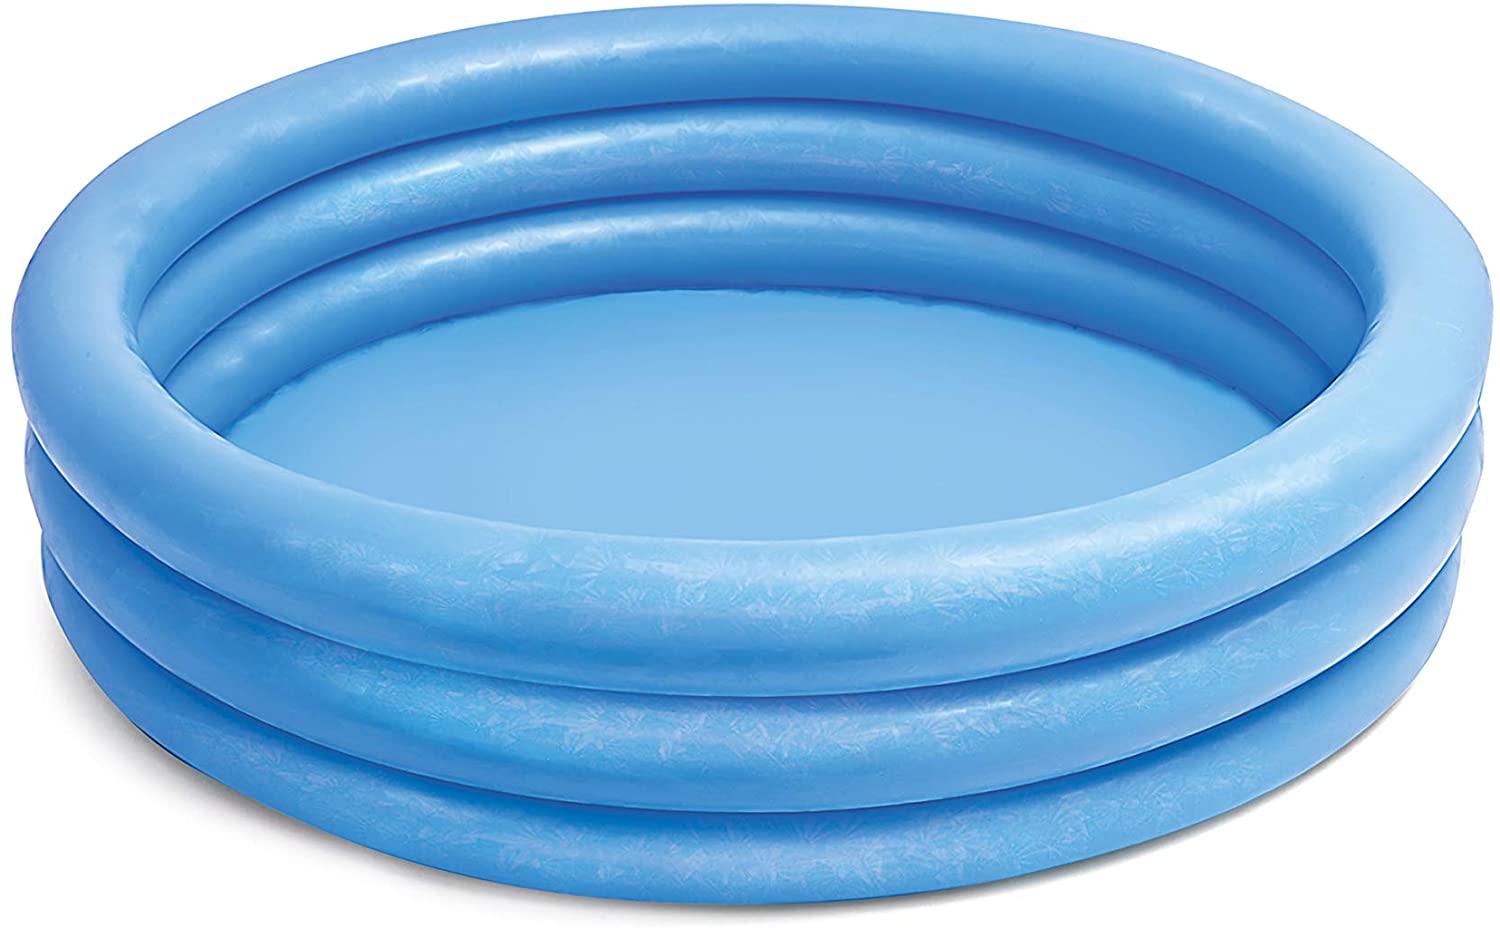 Intex Crystal Blue Children’s Easy Clean Inflatable Pool, 58-Inch